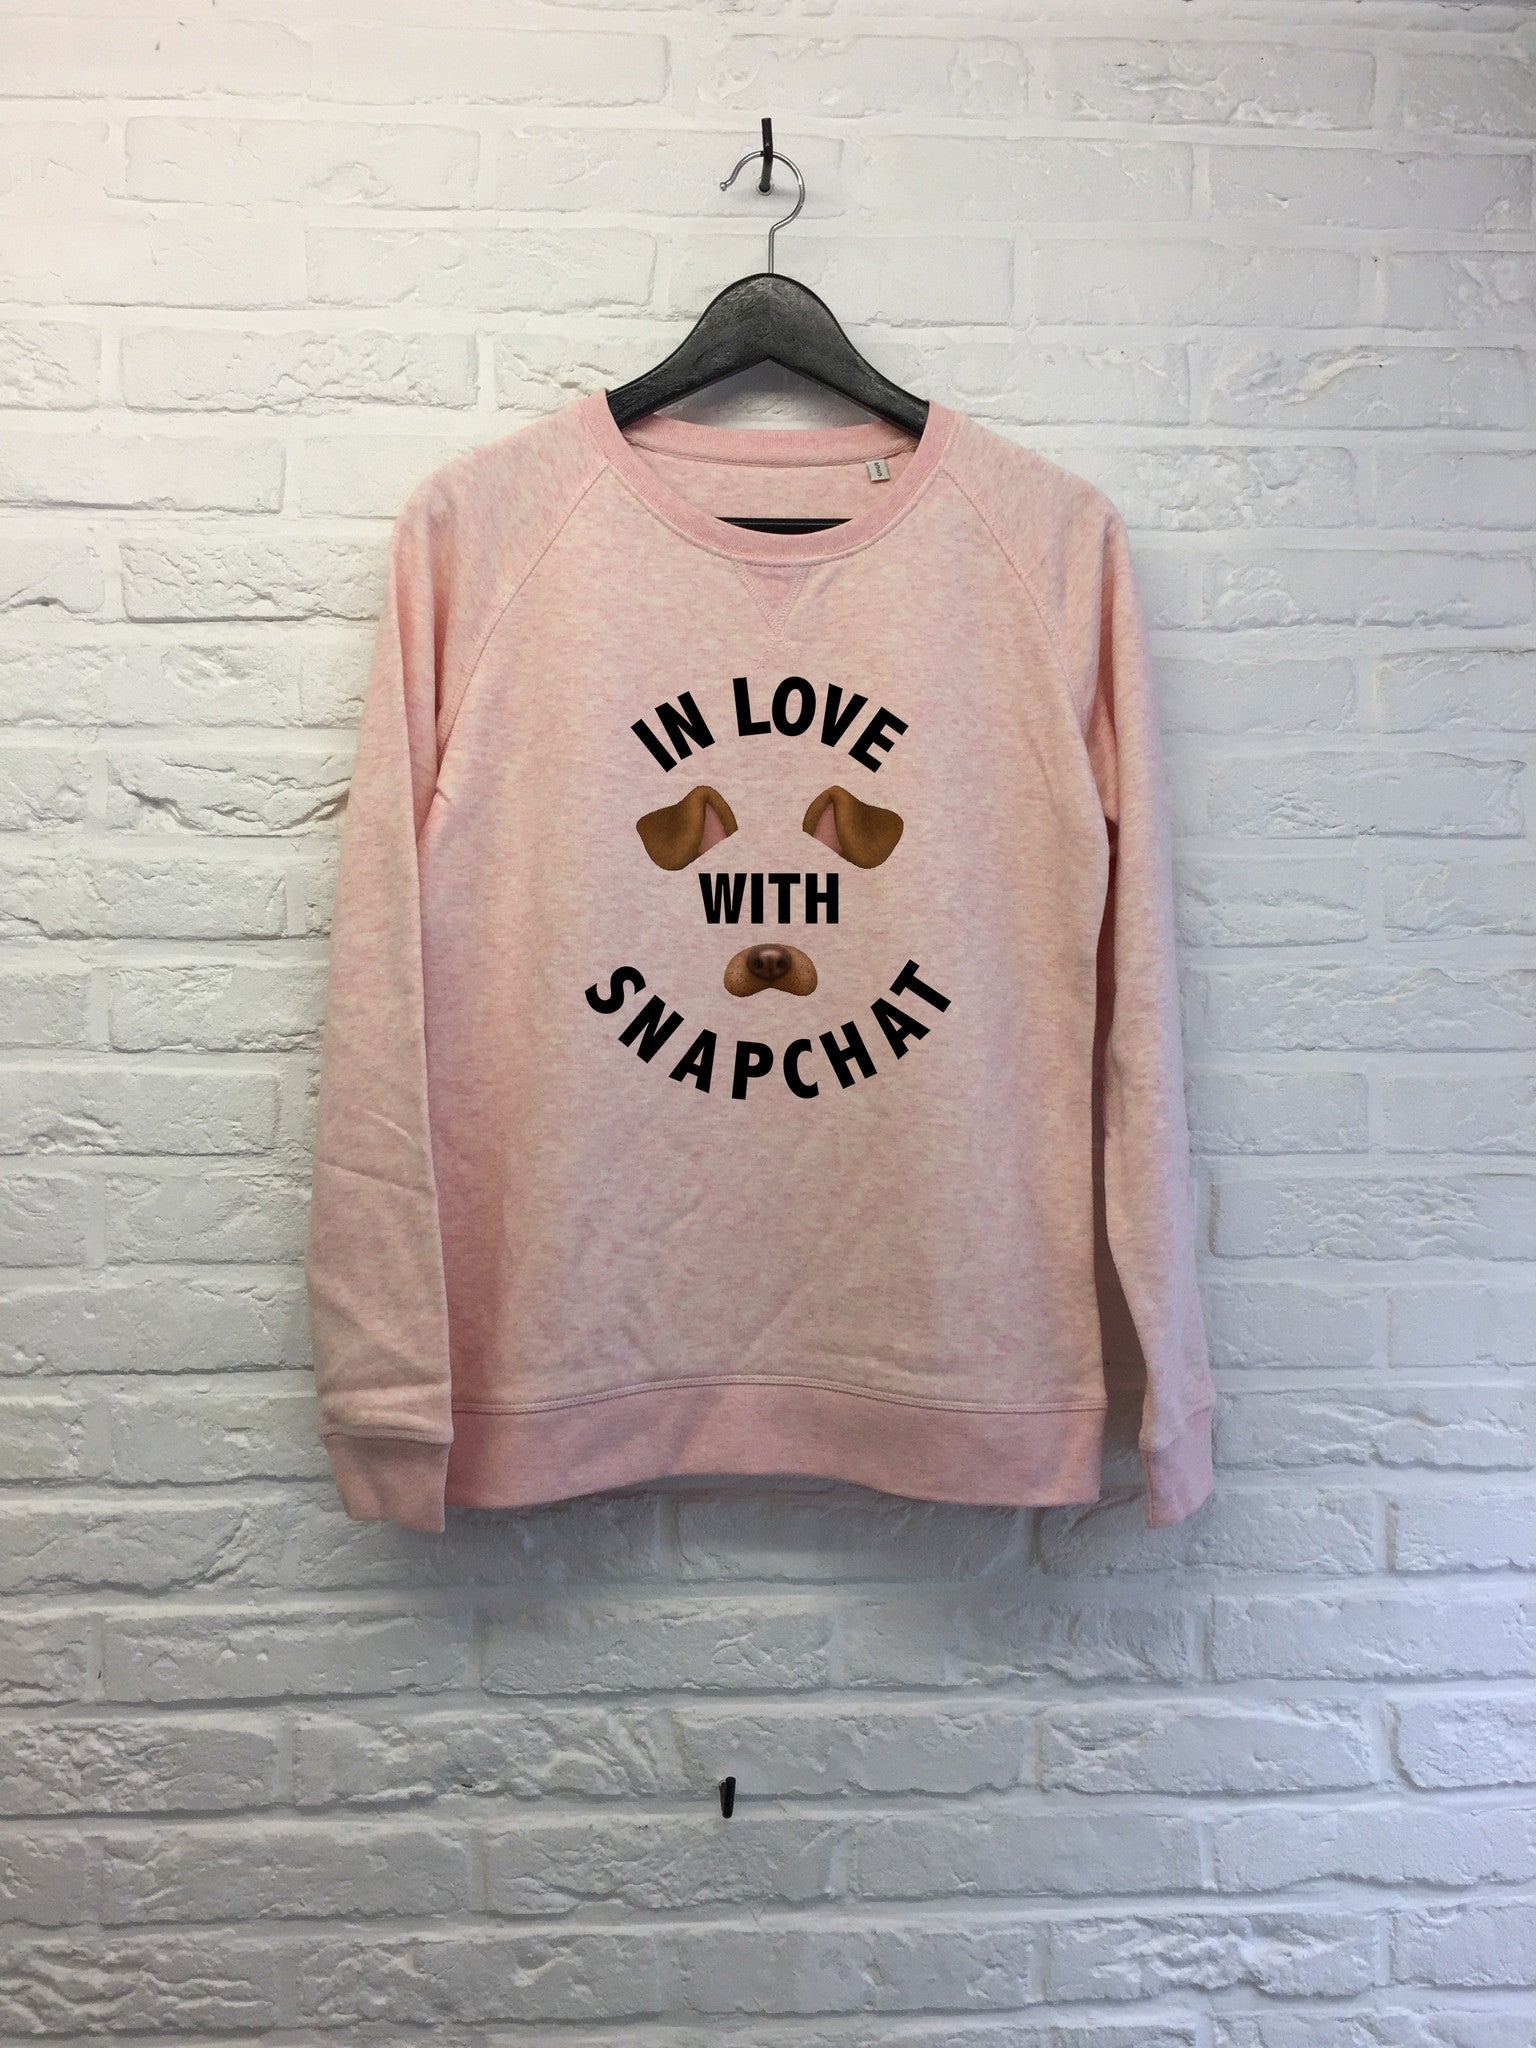 In love with Snapchat - Sweat - Femme-Sweat shirts-Atelier Amelot